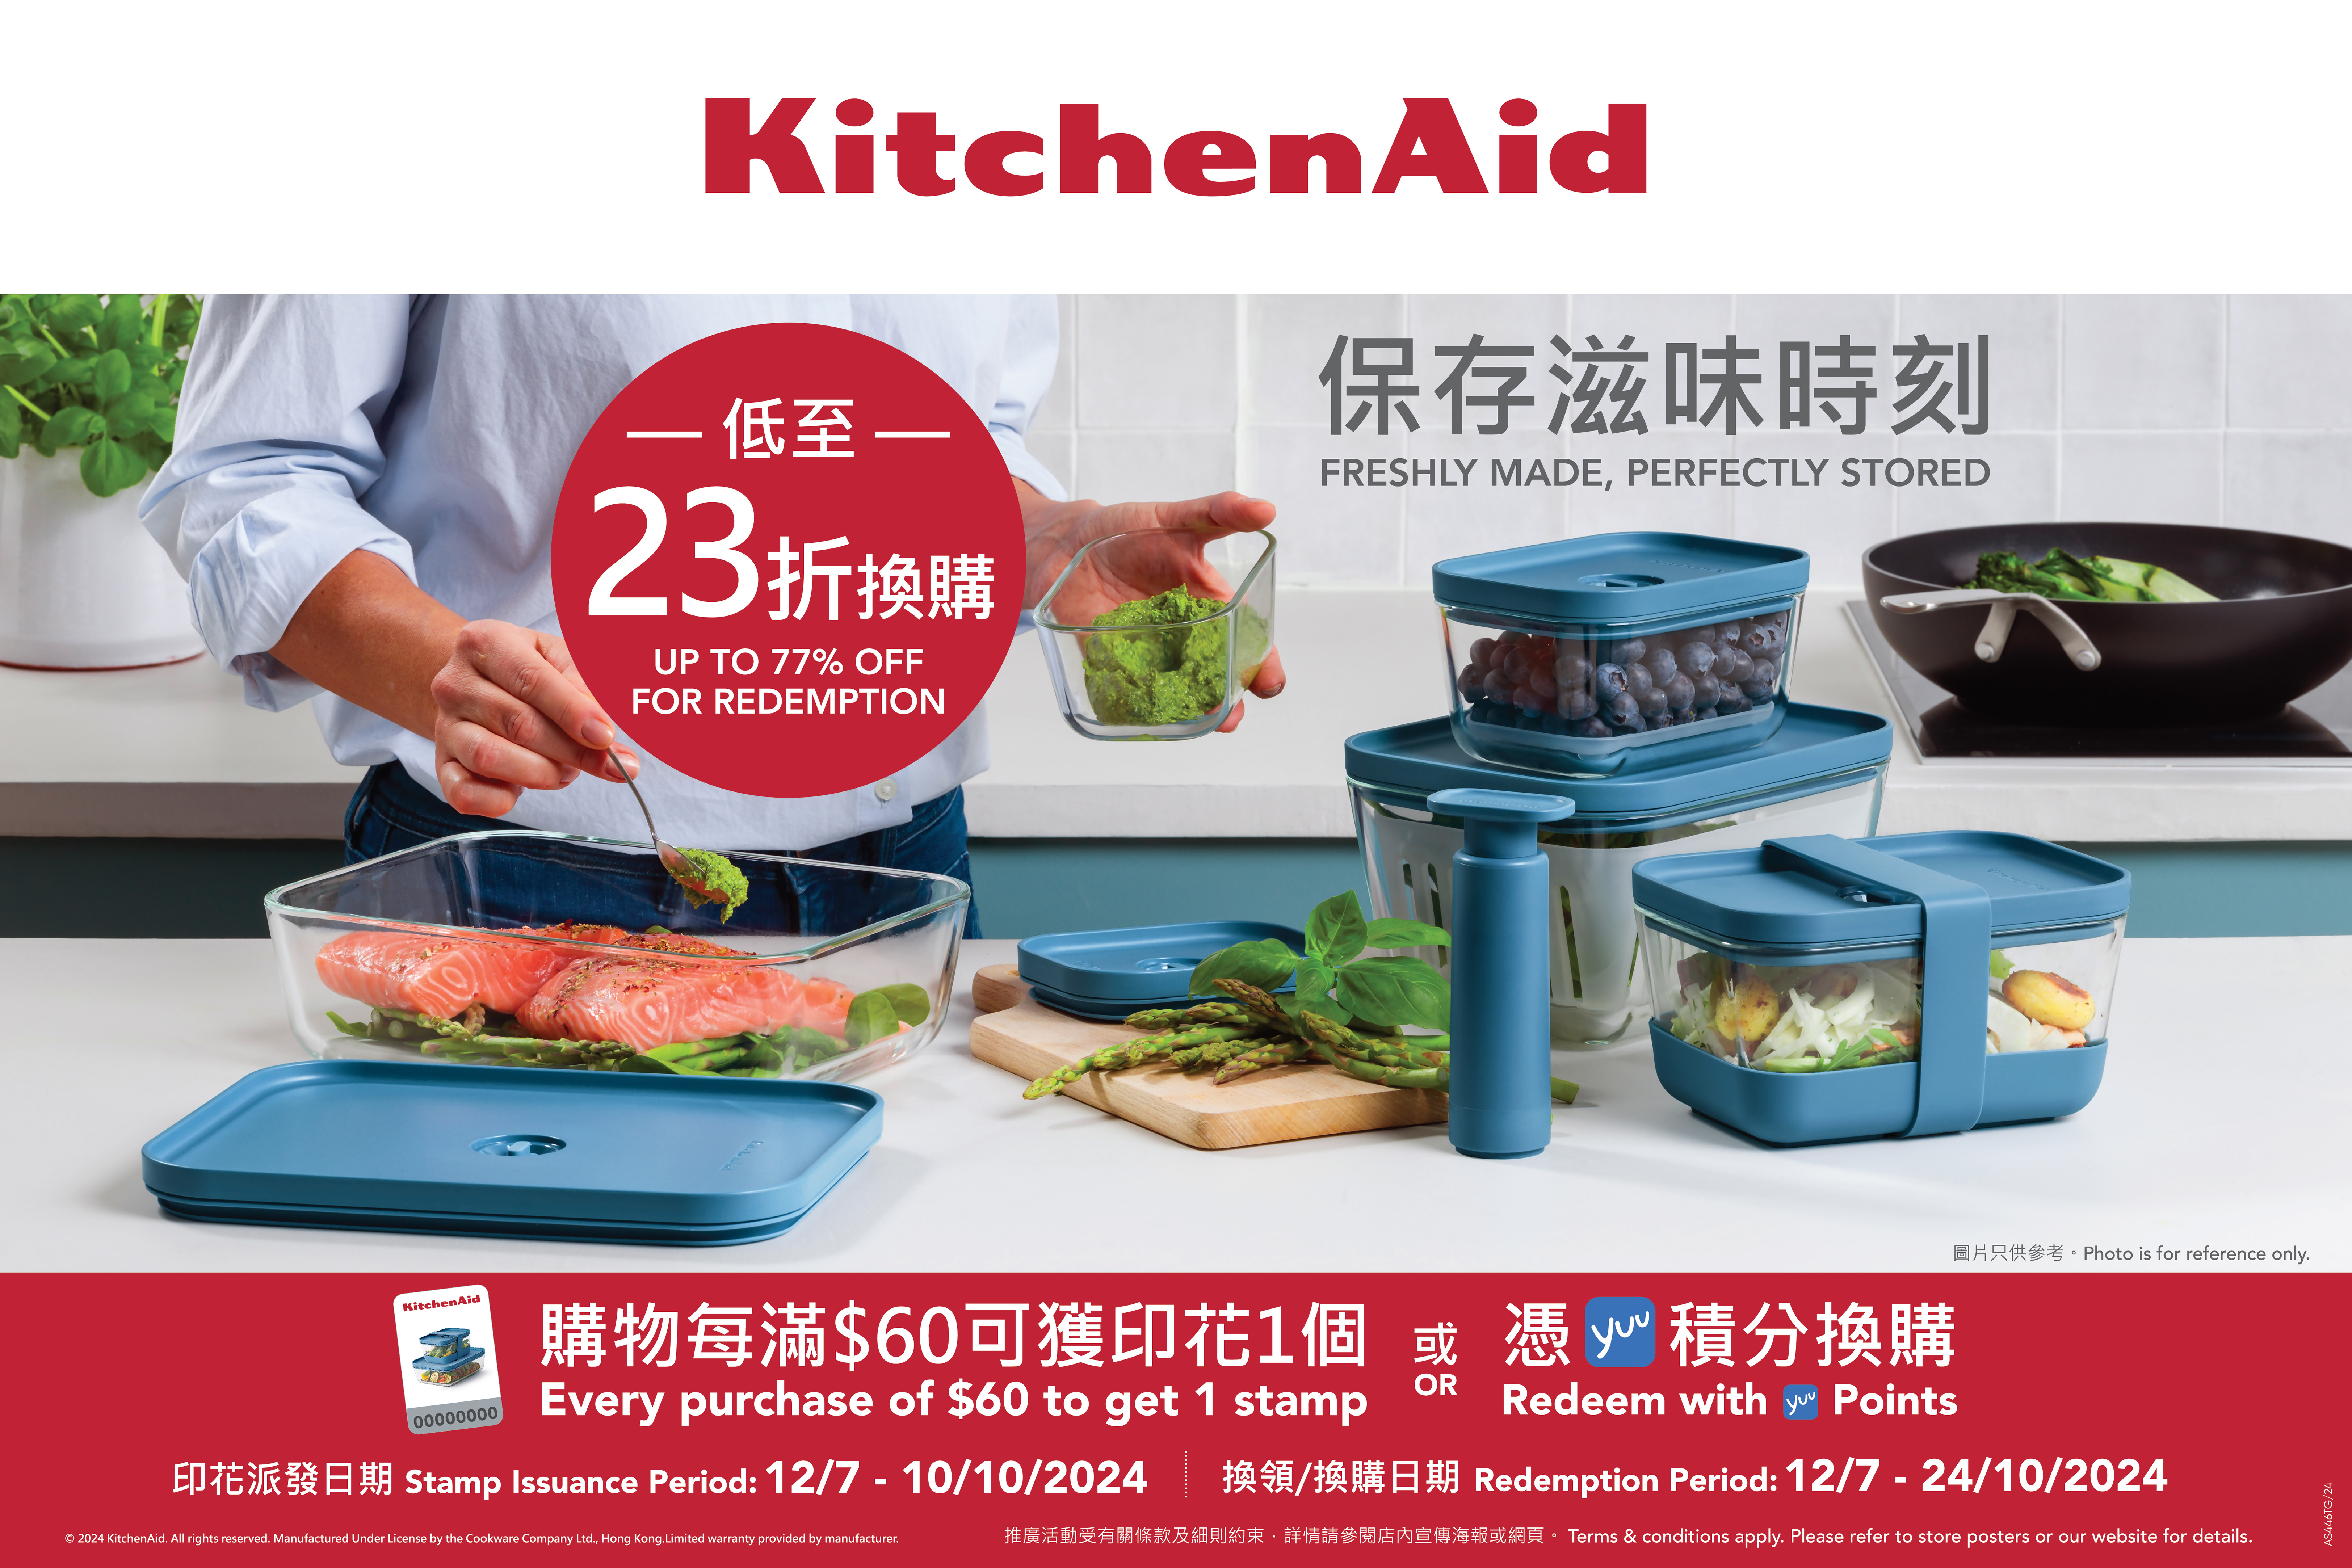 KitchenAid Food Storage and Cookware Collection